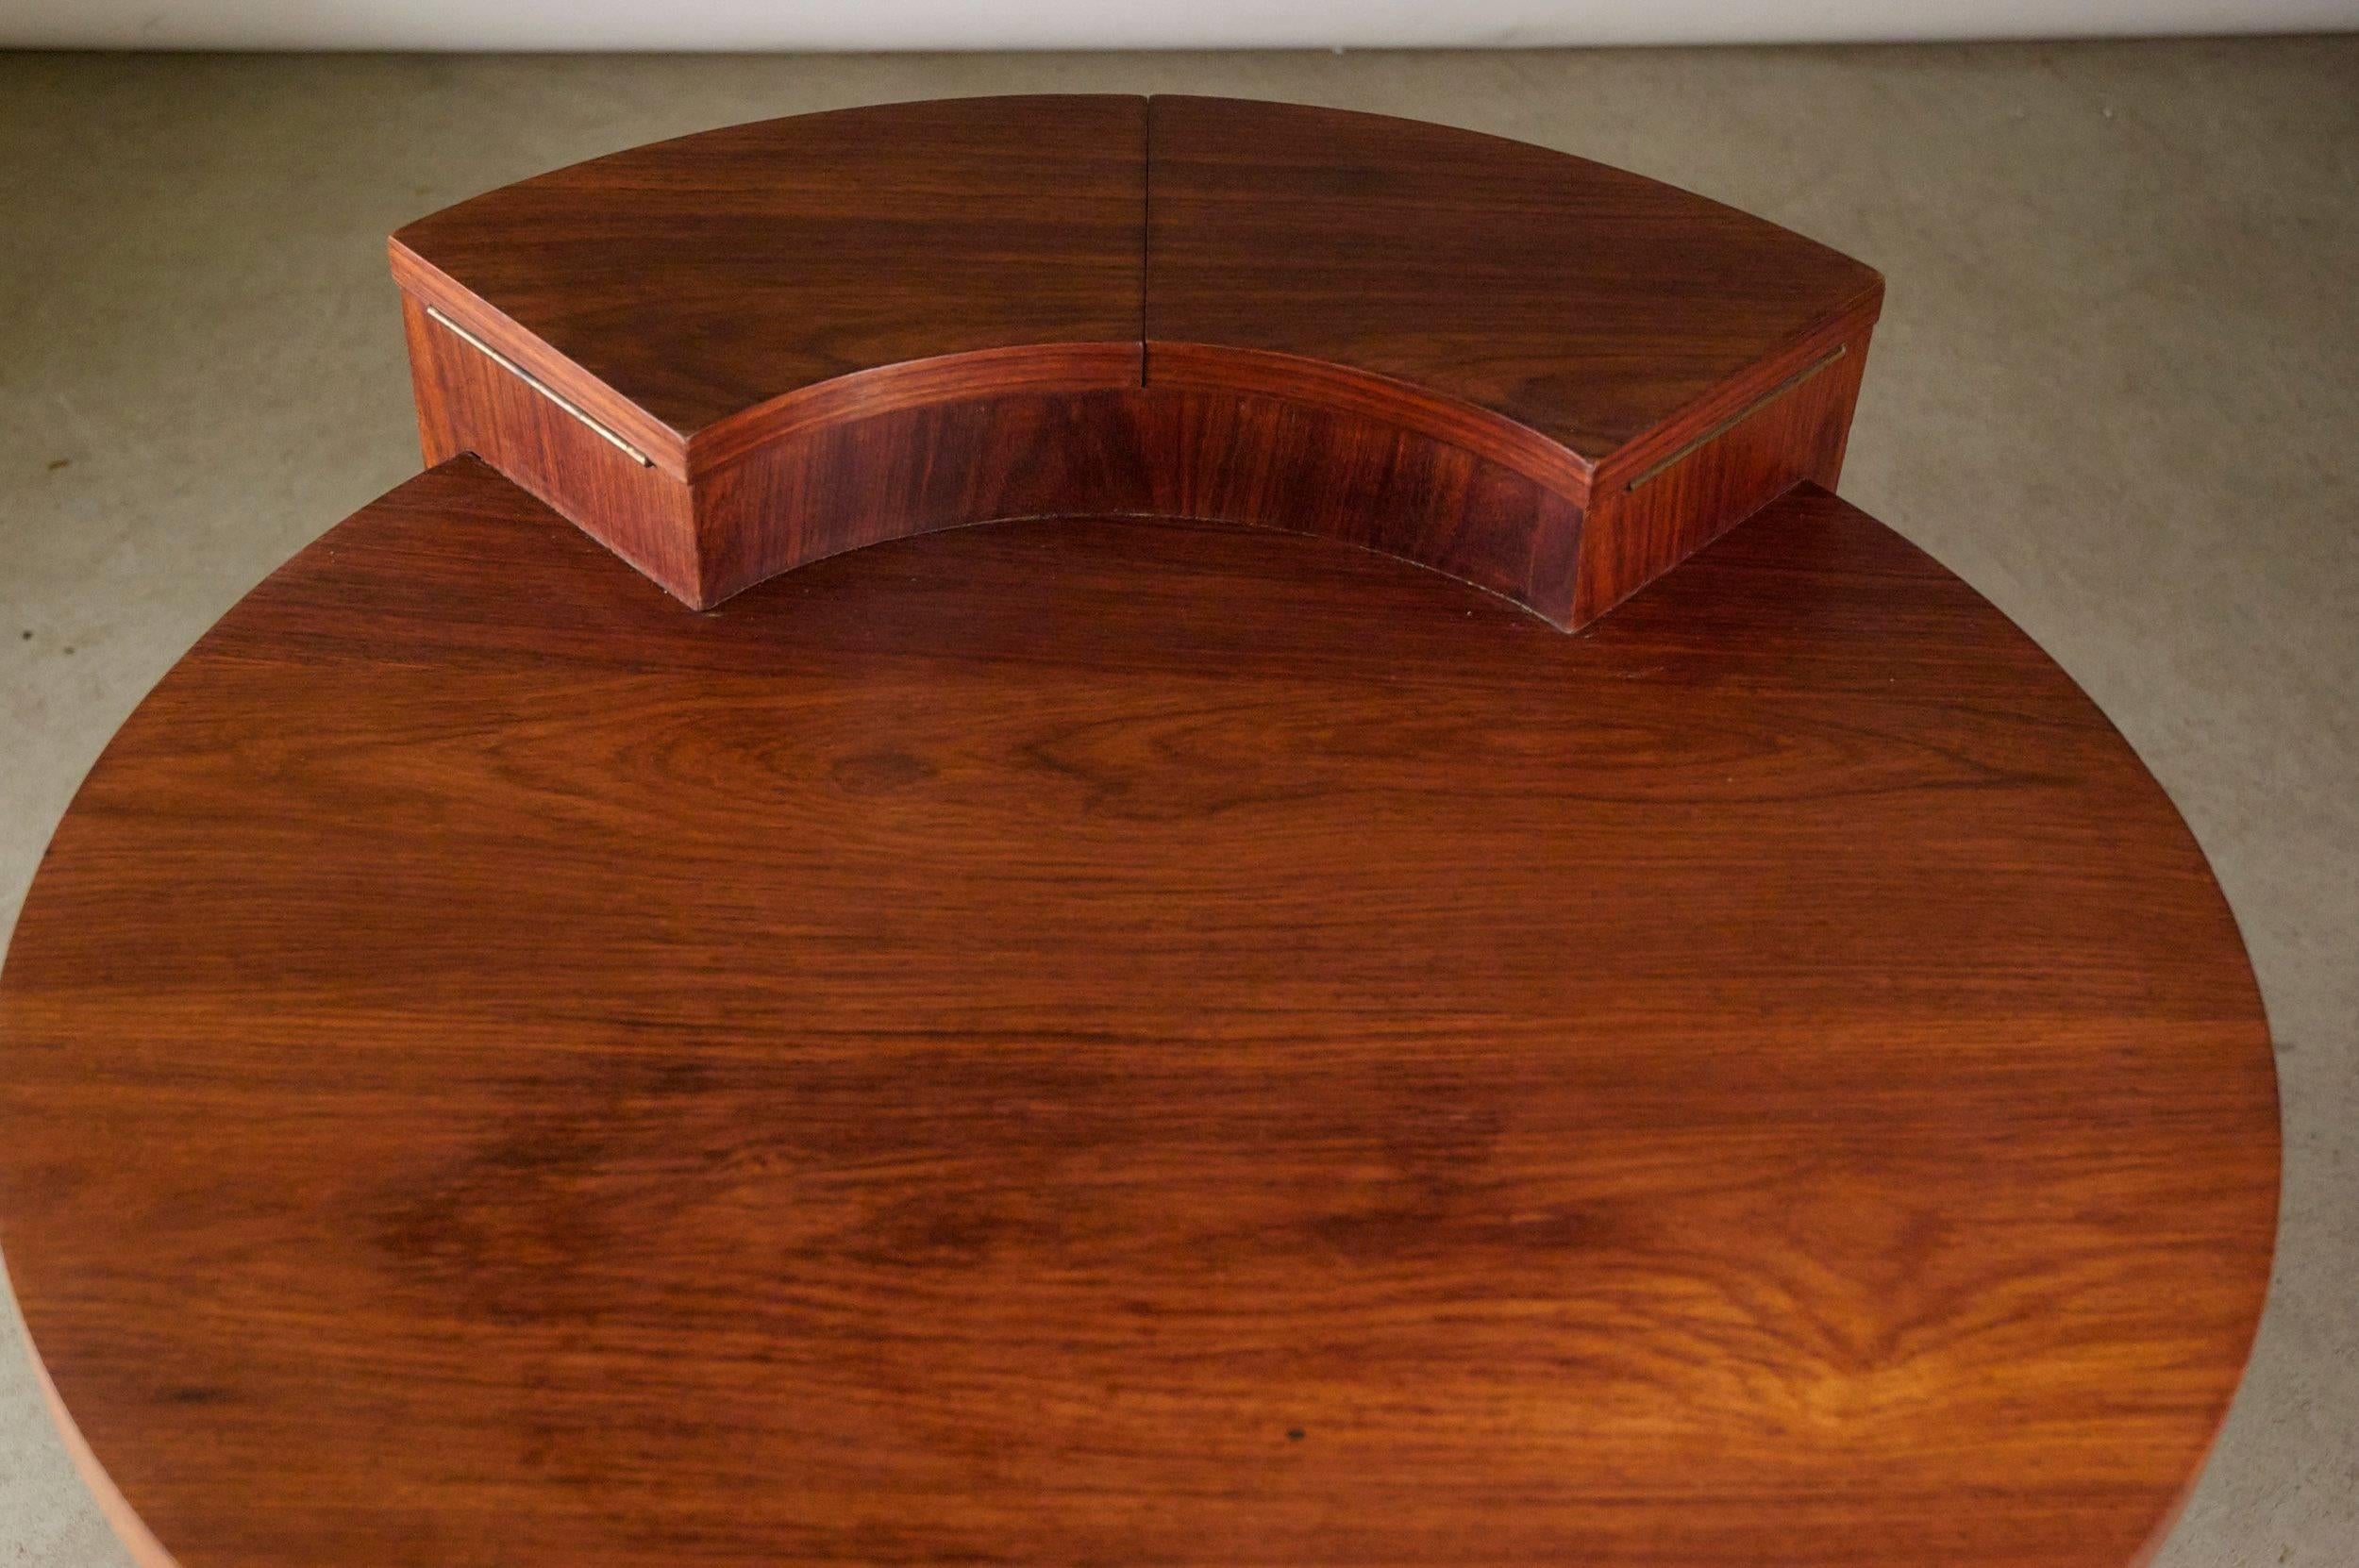 Etienne Kohlmann Modernist Side Table In Excellent Condition For Sale In Philadelphia, PA